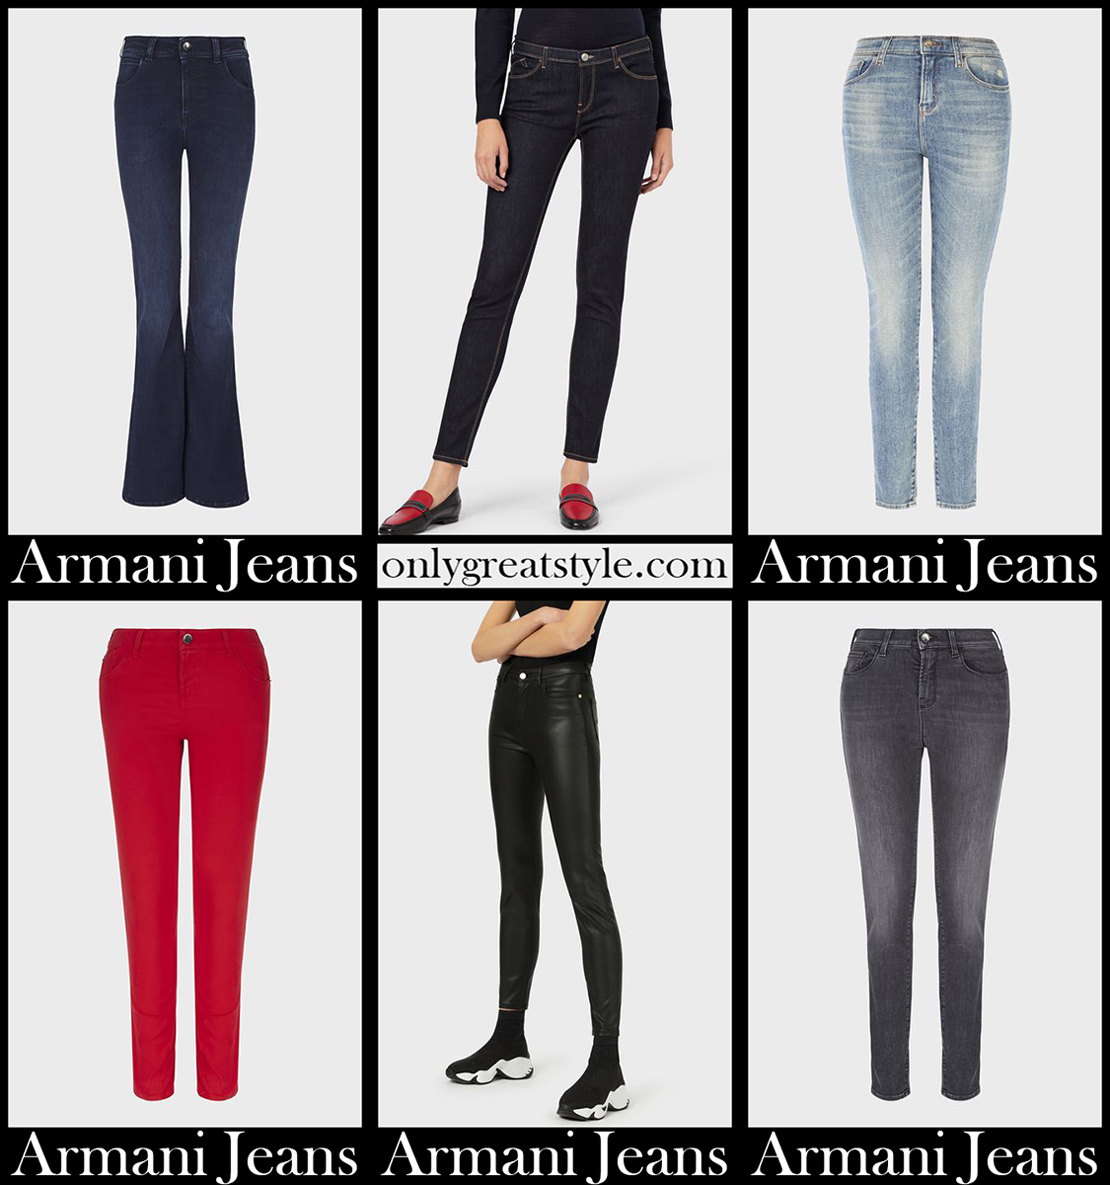 Armani jeans 2021 new arrivals womens clothing